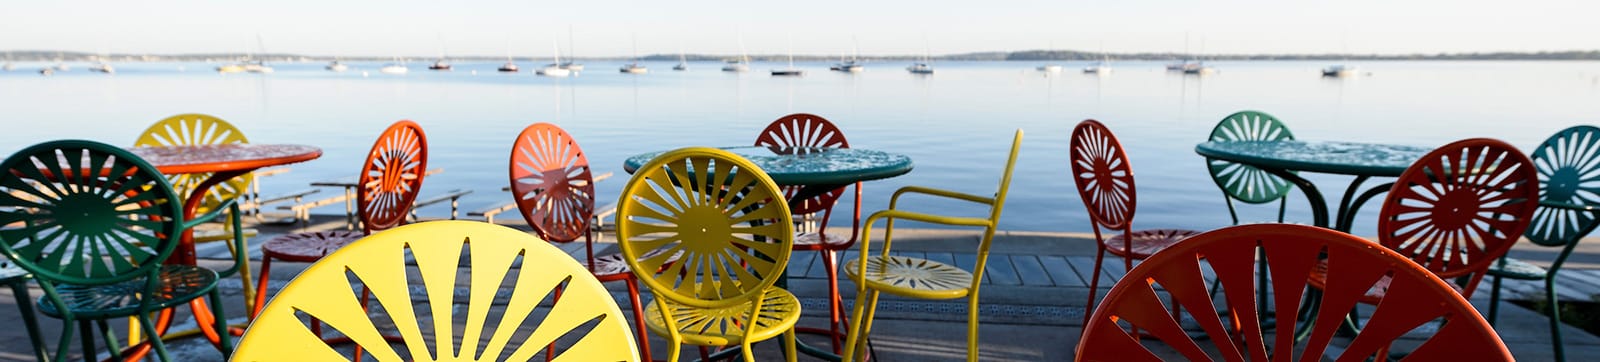 Colorful Terrace chairs sit empty on the Memorial Union Terrace with Lake Mendota in the background.